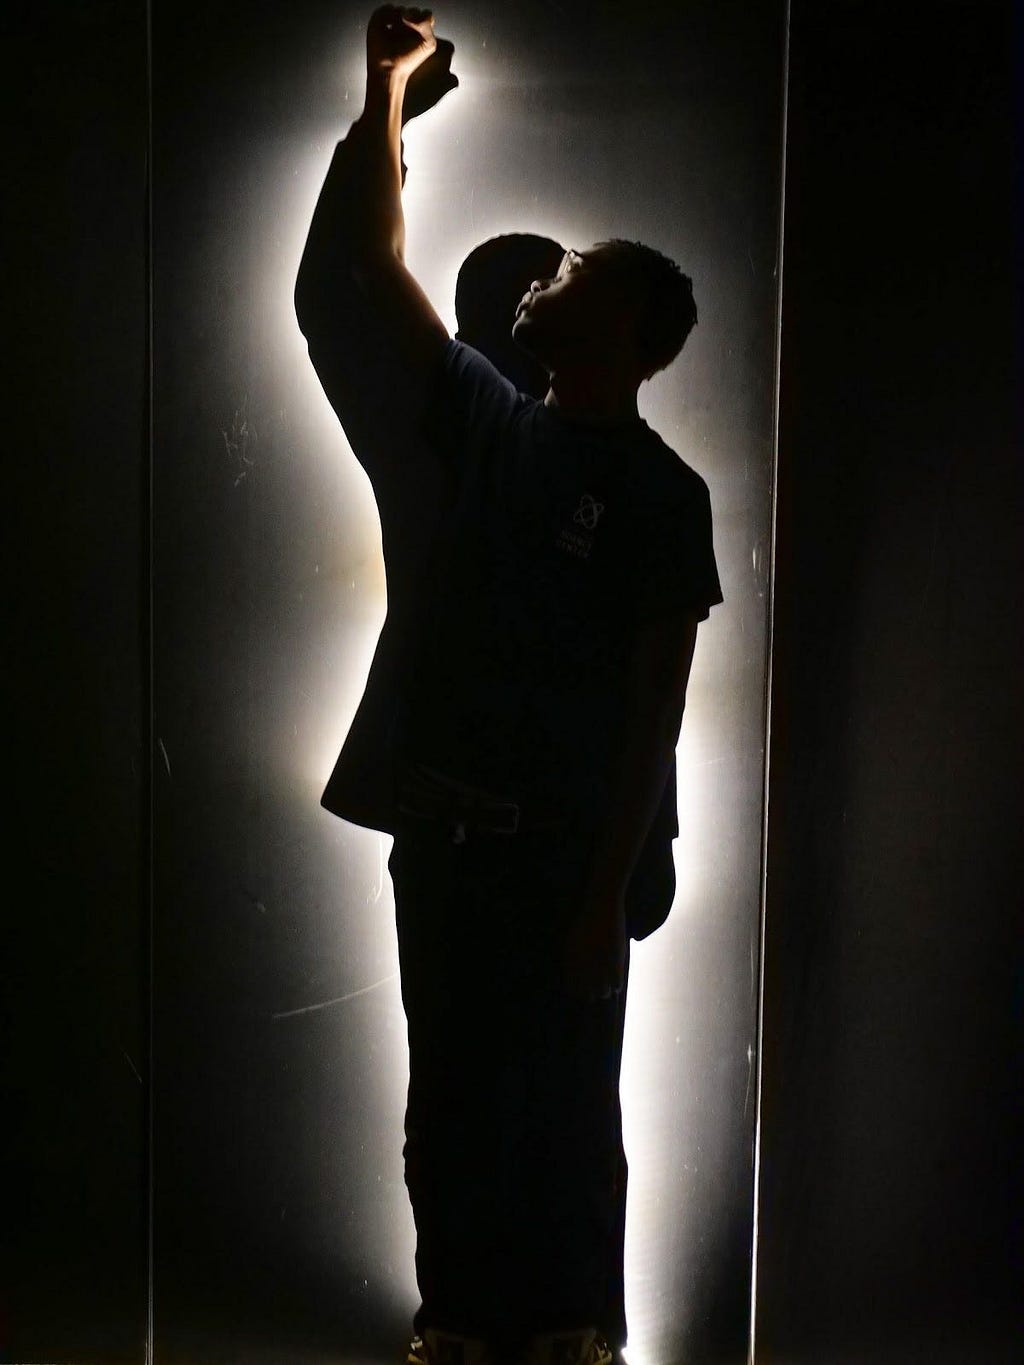 A photograph of a Black teen standing in front of a silhouette of a slightly taller Black man. Both the teen and the silhouette hold one raised fist in the air. The silhouette is outlined by white light. The teen’s back is to the viewer and he looks to the left, towards his raised fist. It is too dark to see what the teen is wearing. He wears glasses.